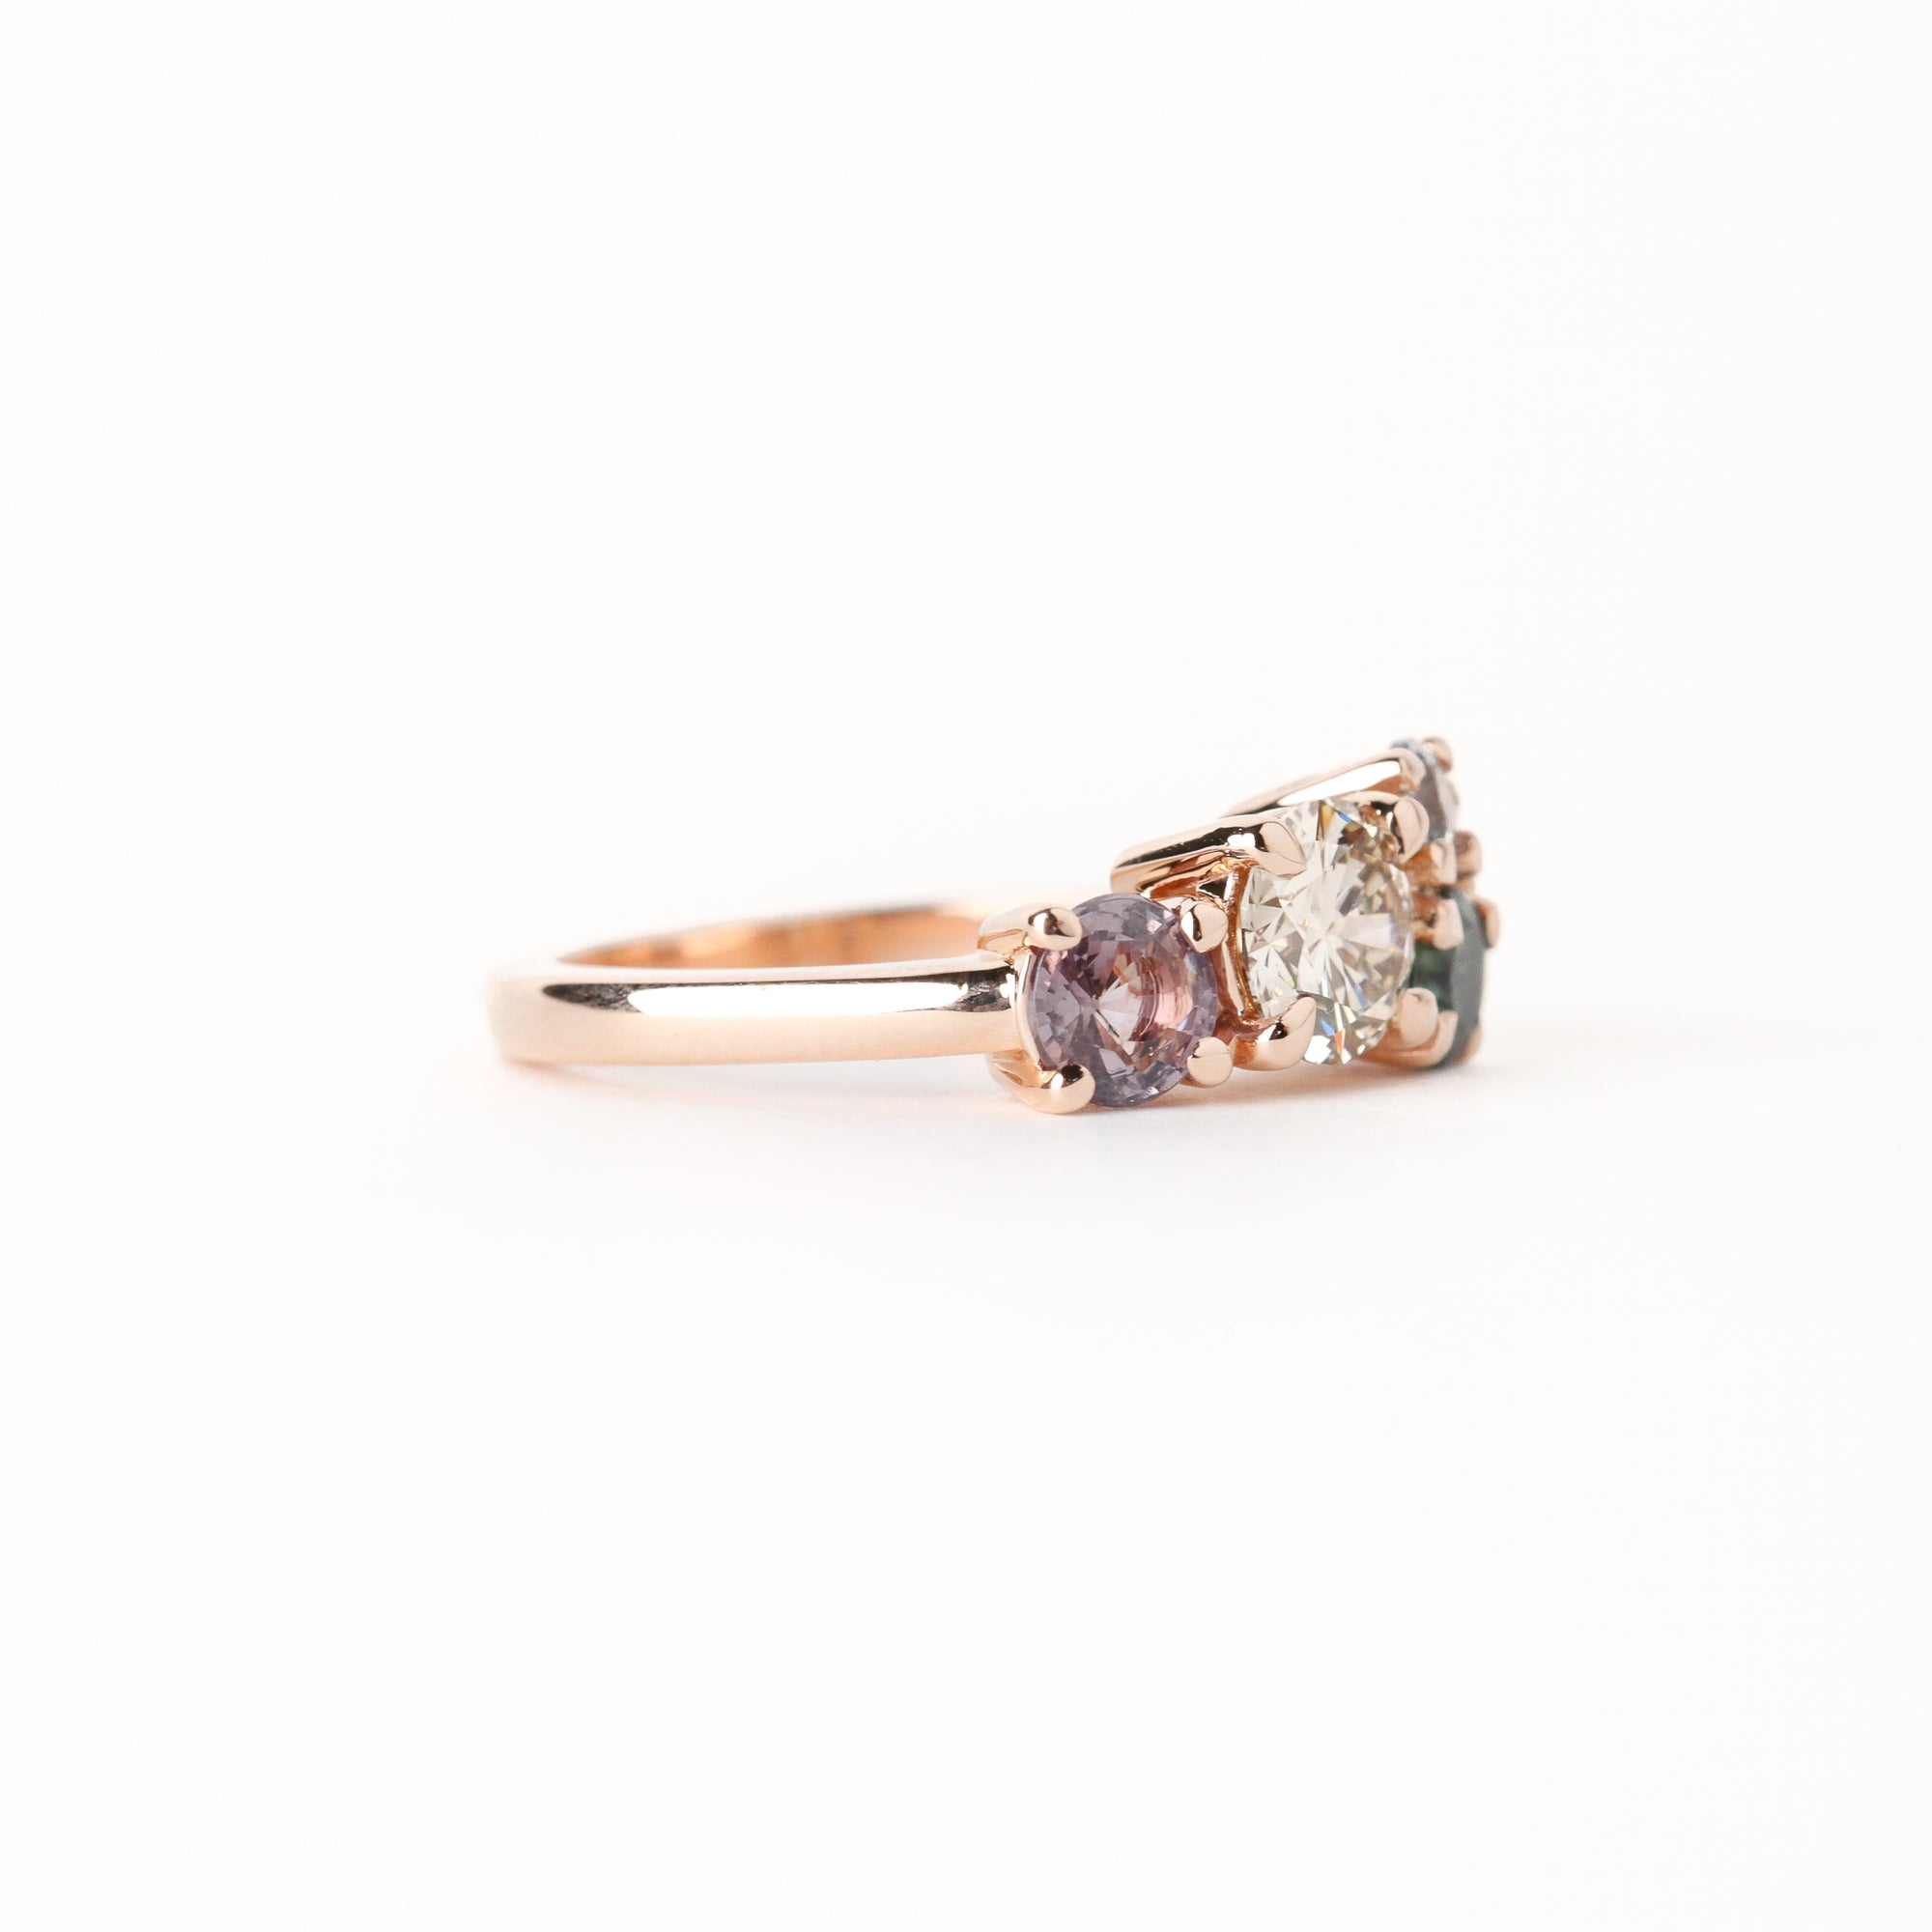 Handmade Ethically Sourced Australian Sapphire and Diamond Engagement Ring in 18ct Gold 